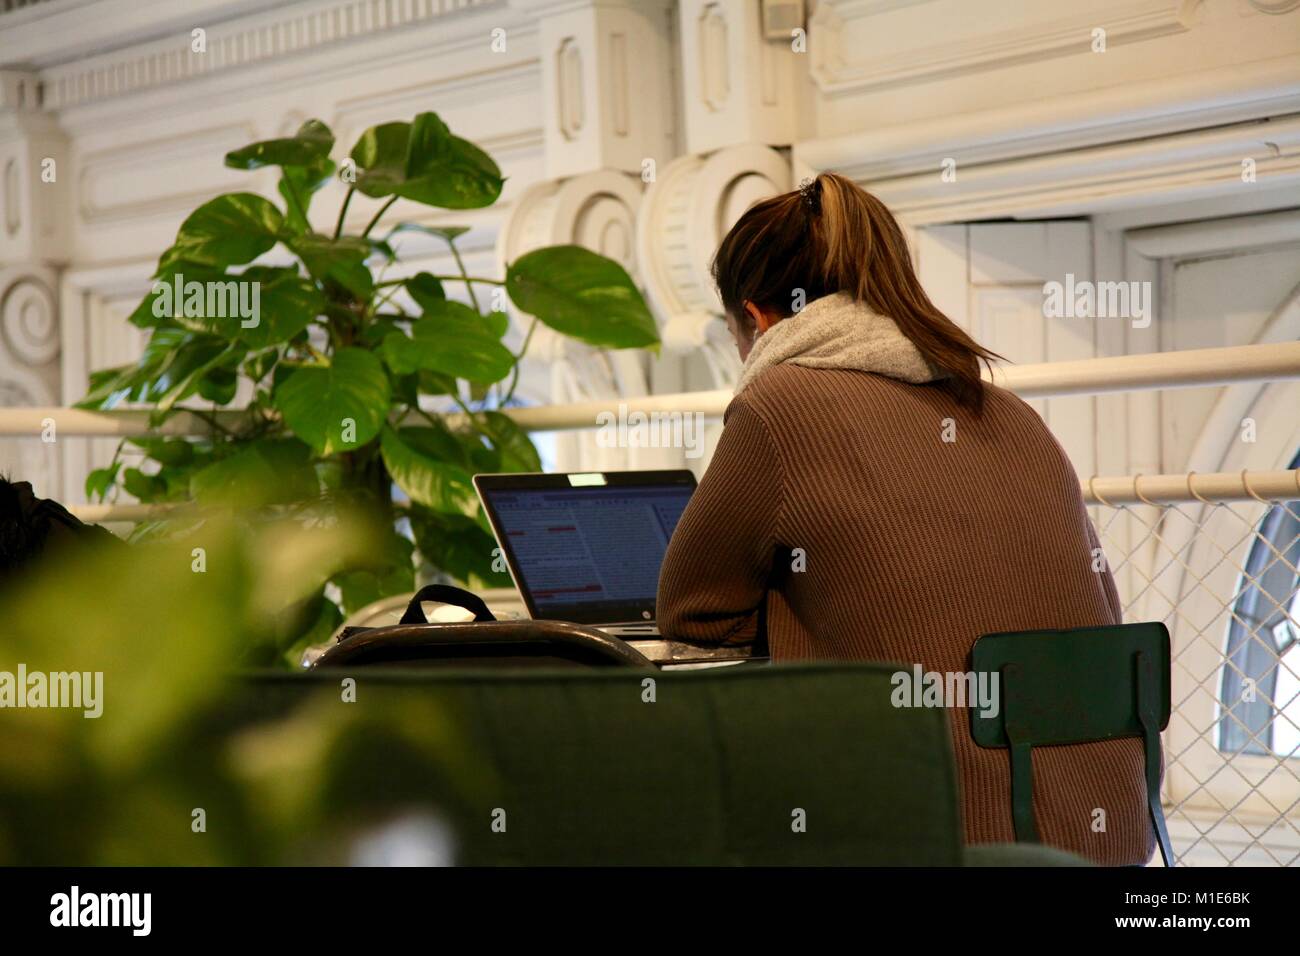 Professional woman working on a laptop in a cafe Banque D'Images